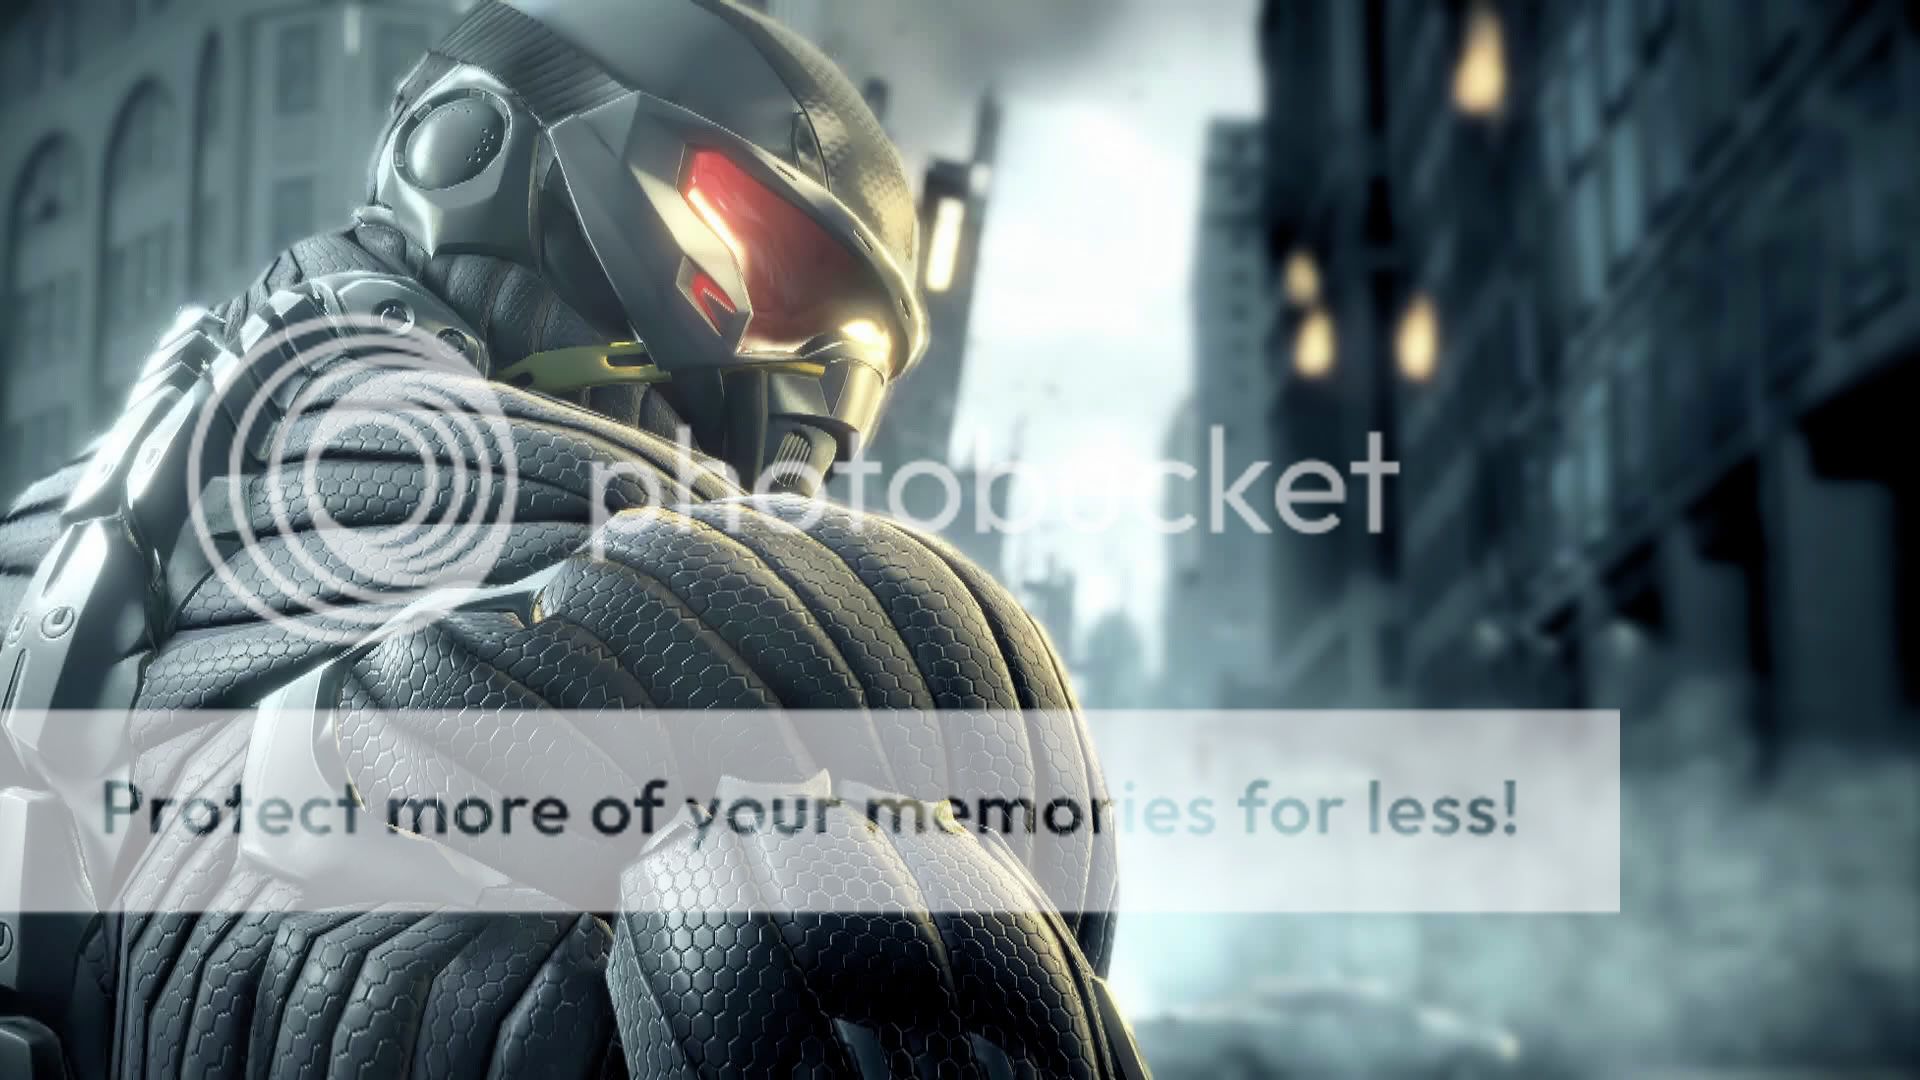 Crysis 2 Pictures, Images and Photos